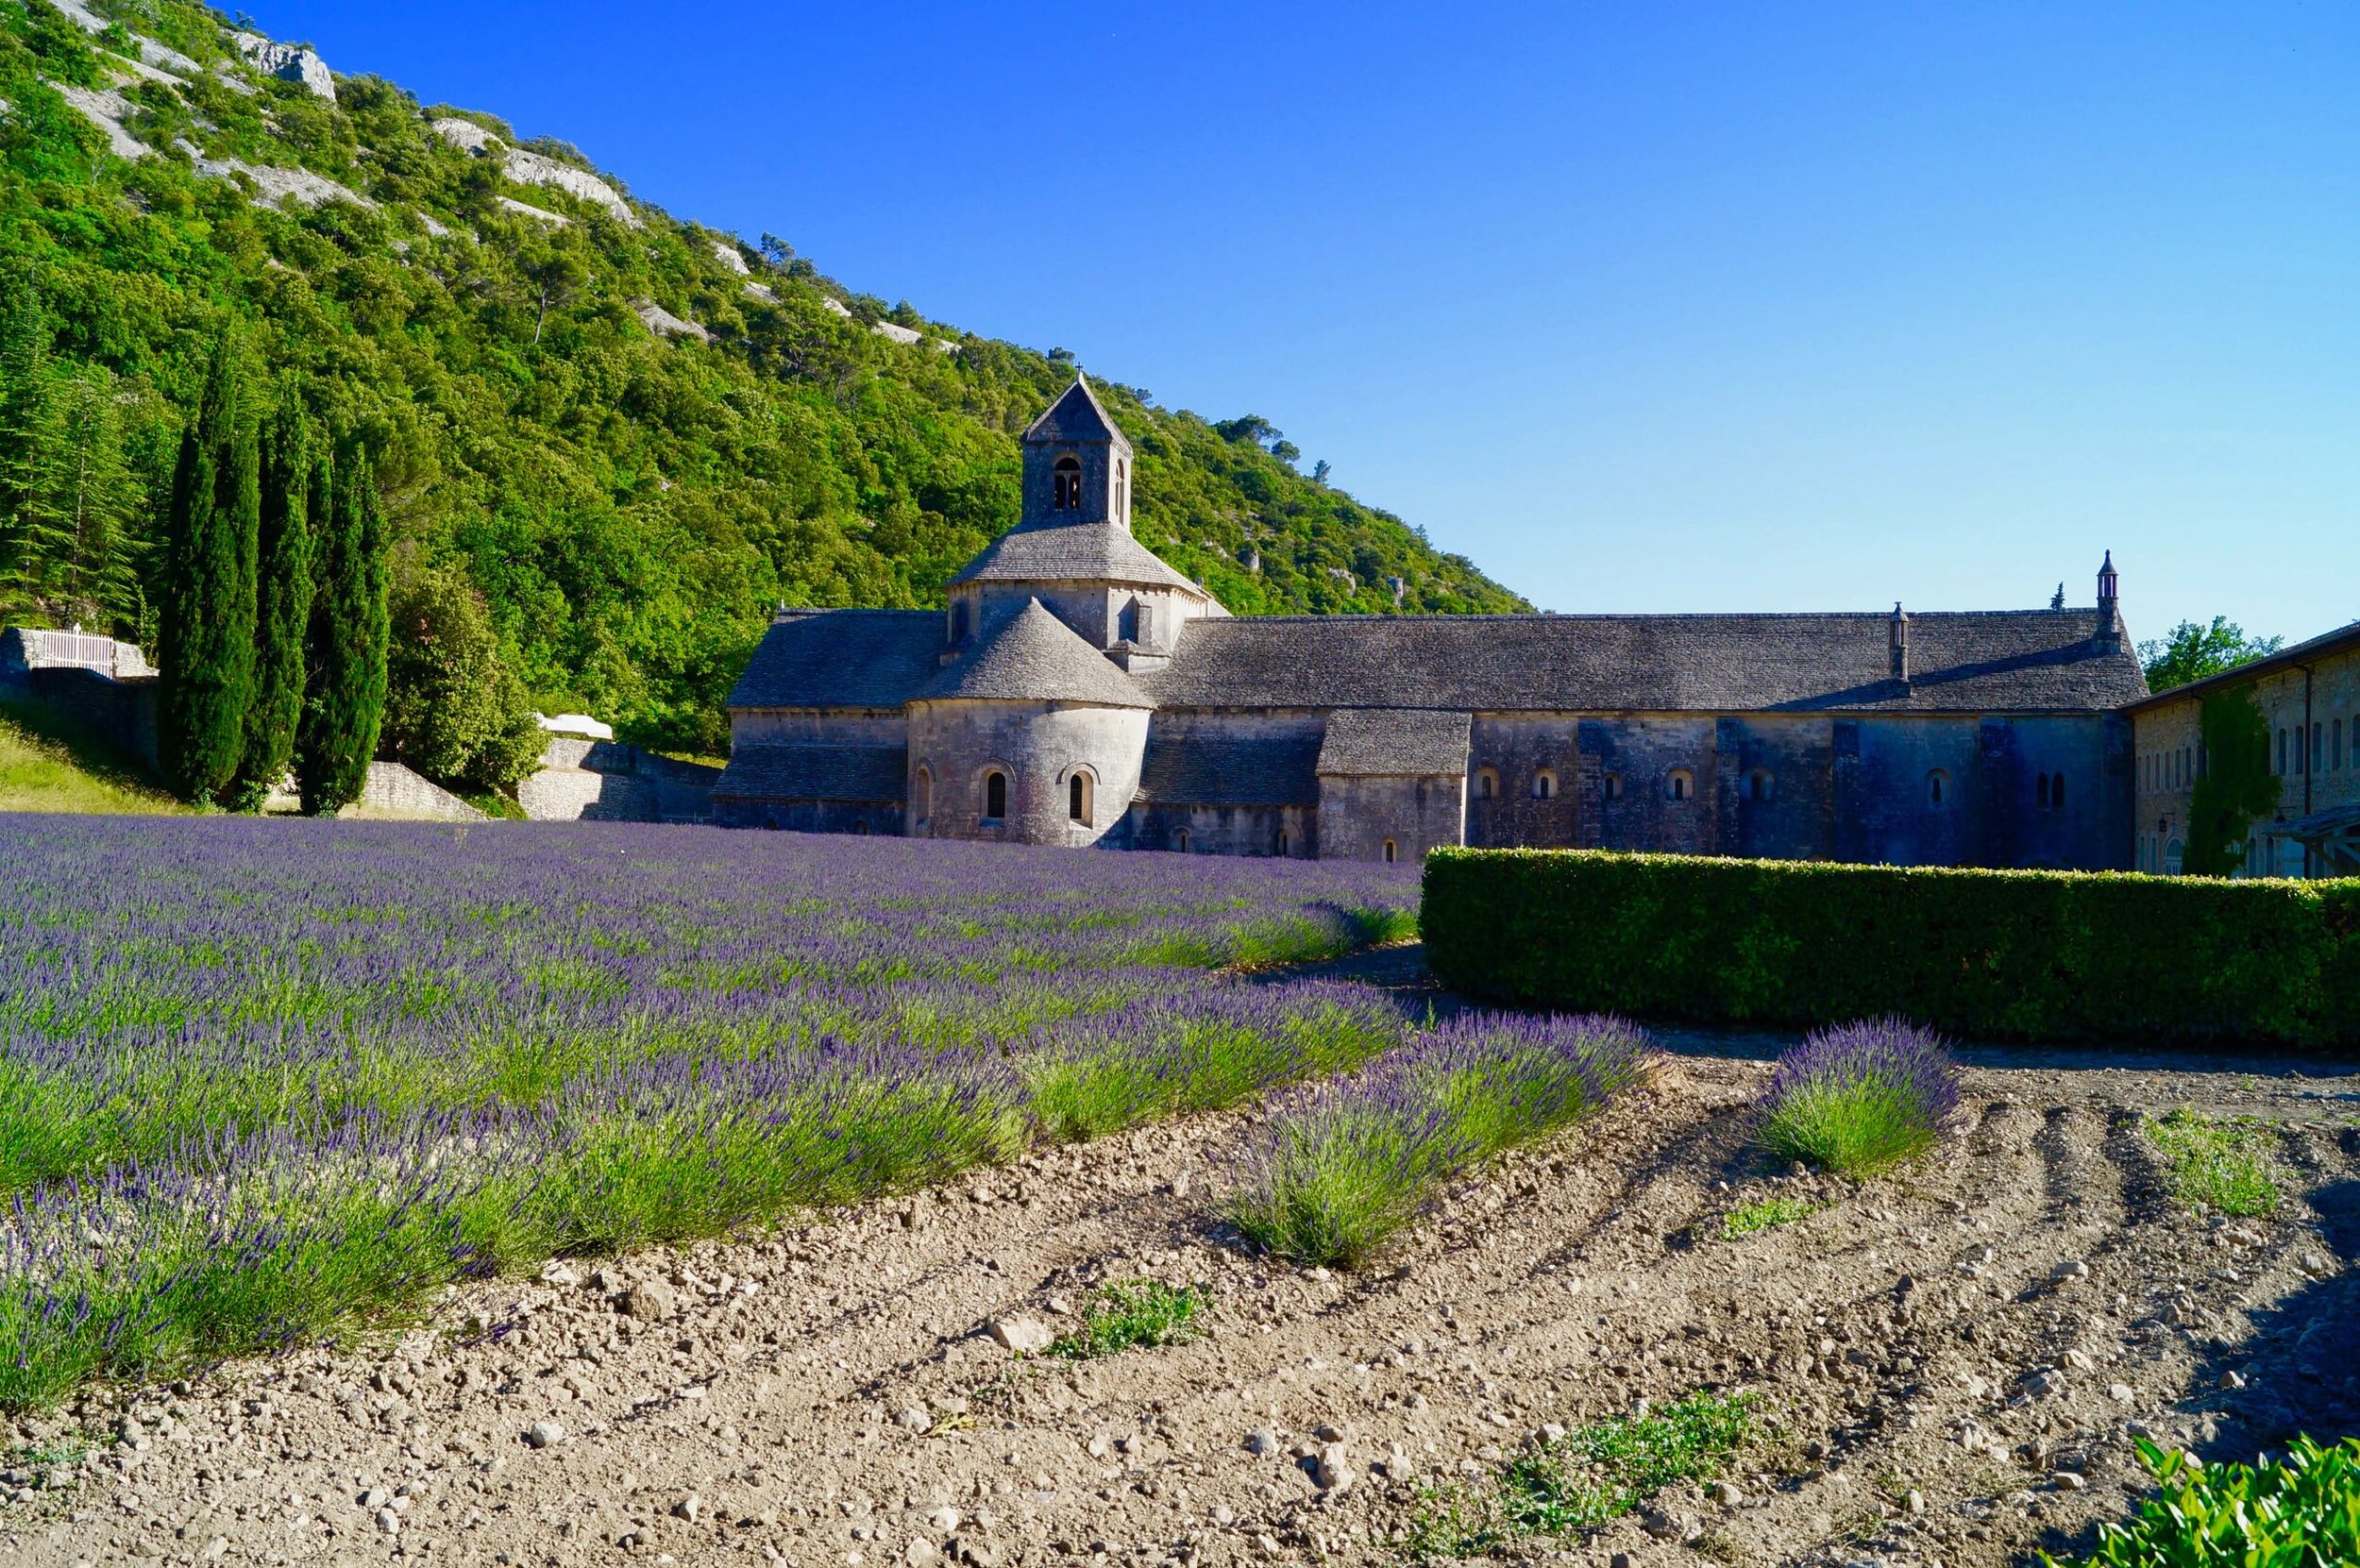 James Orr Provence Unsplash French Chataux set in beautiful Lavender fields in Provence.jpg